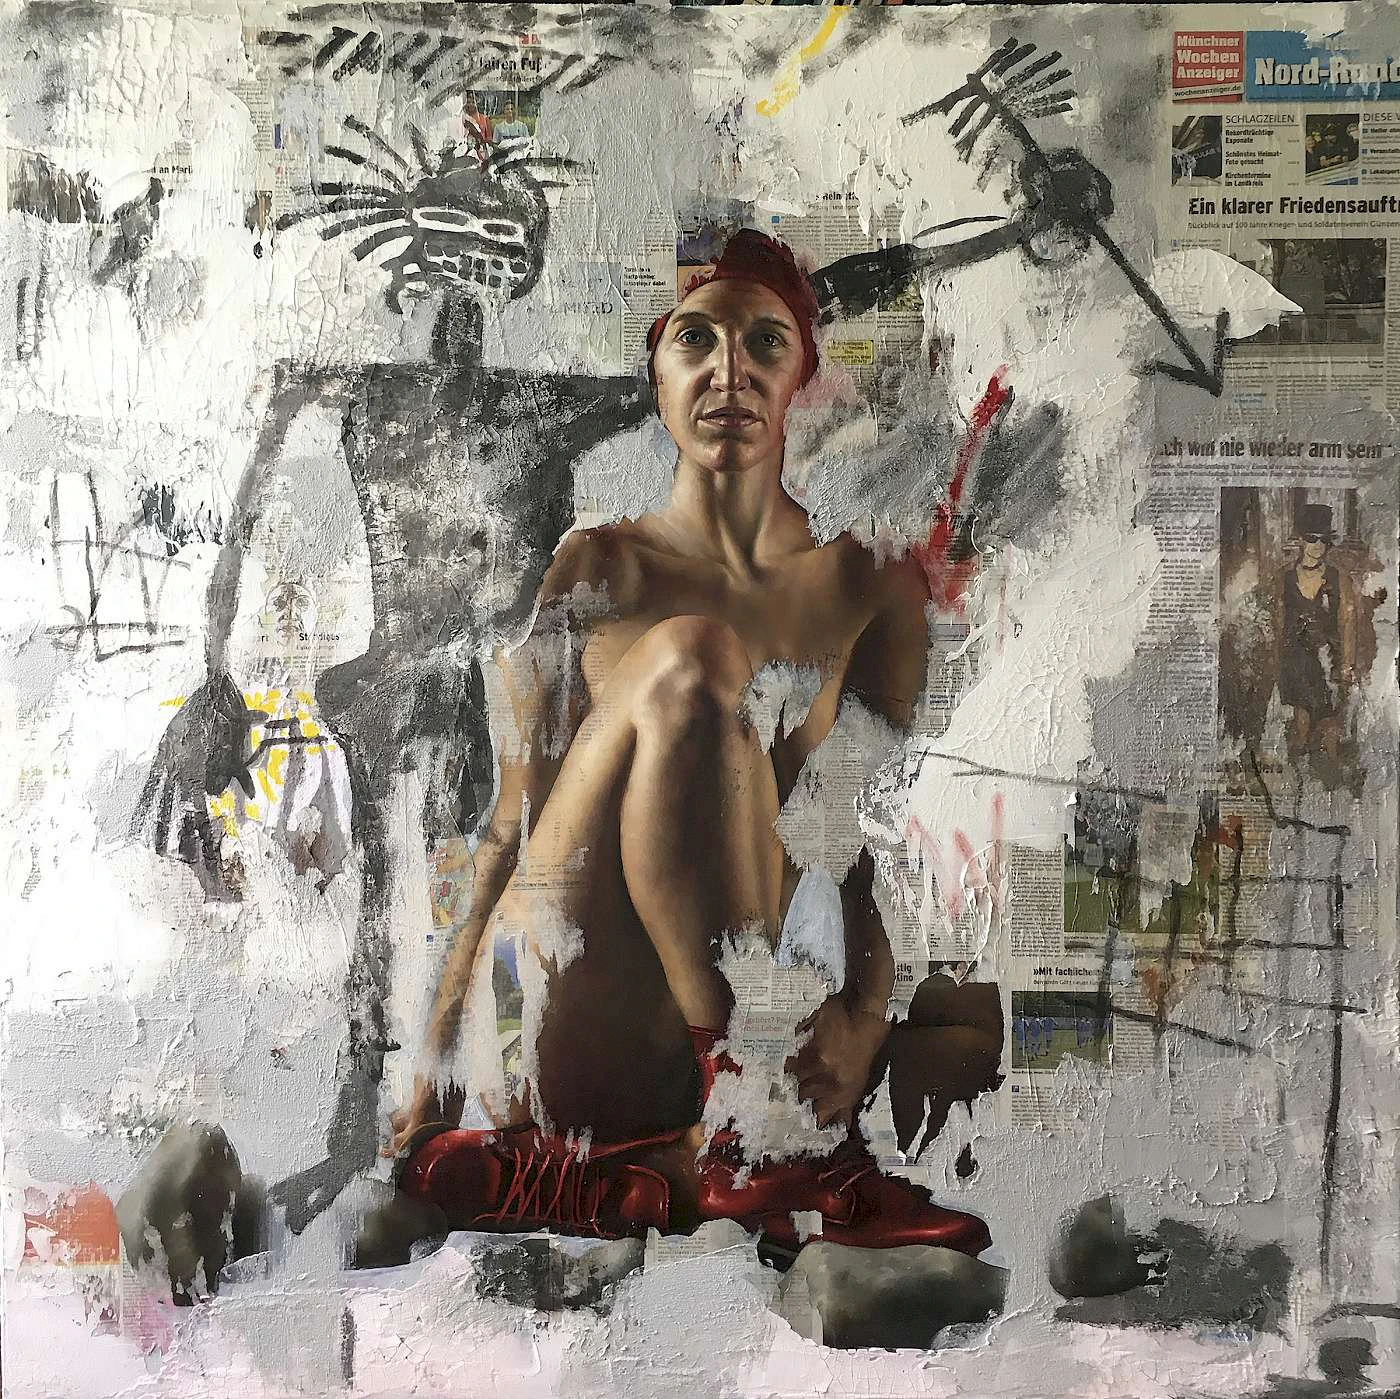 Anton Hoeger, Woman with Red Shoes, 2019, oil on canvas, 43 1/3 x 43 1/3 inches